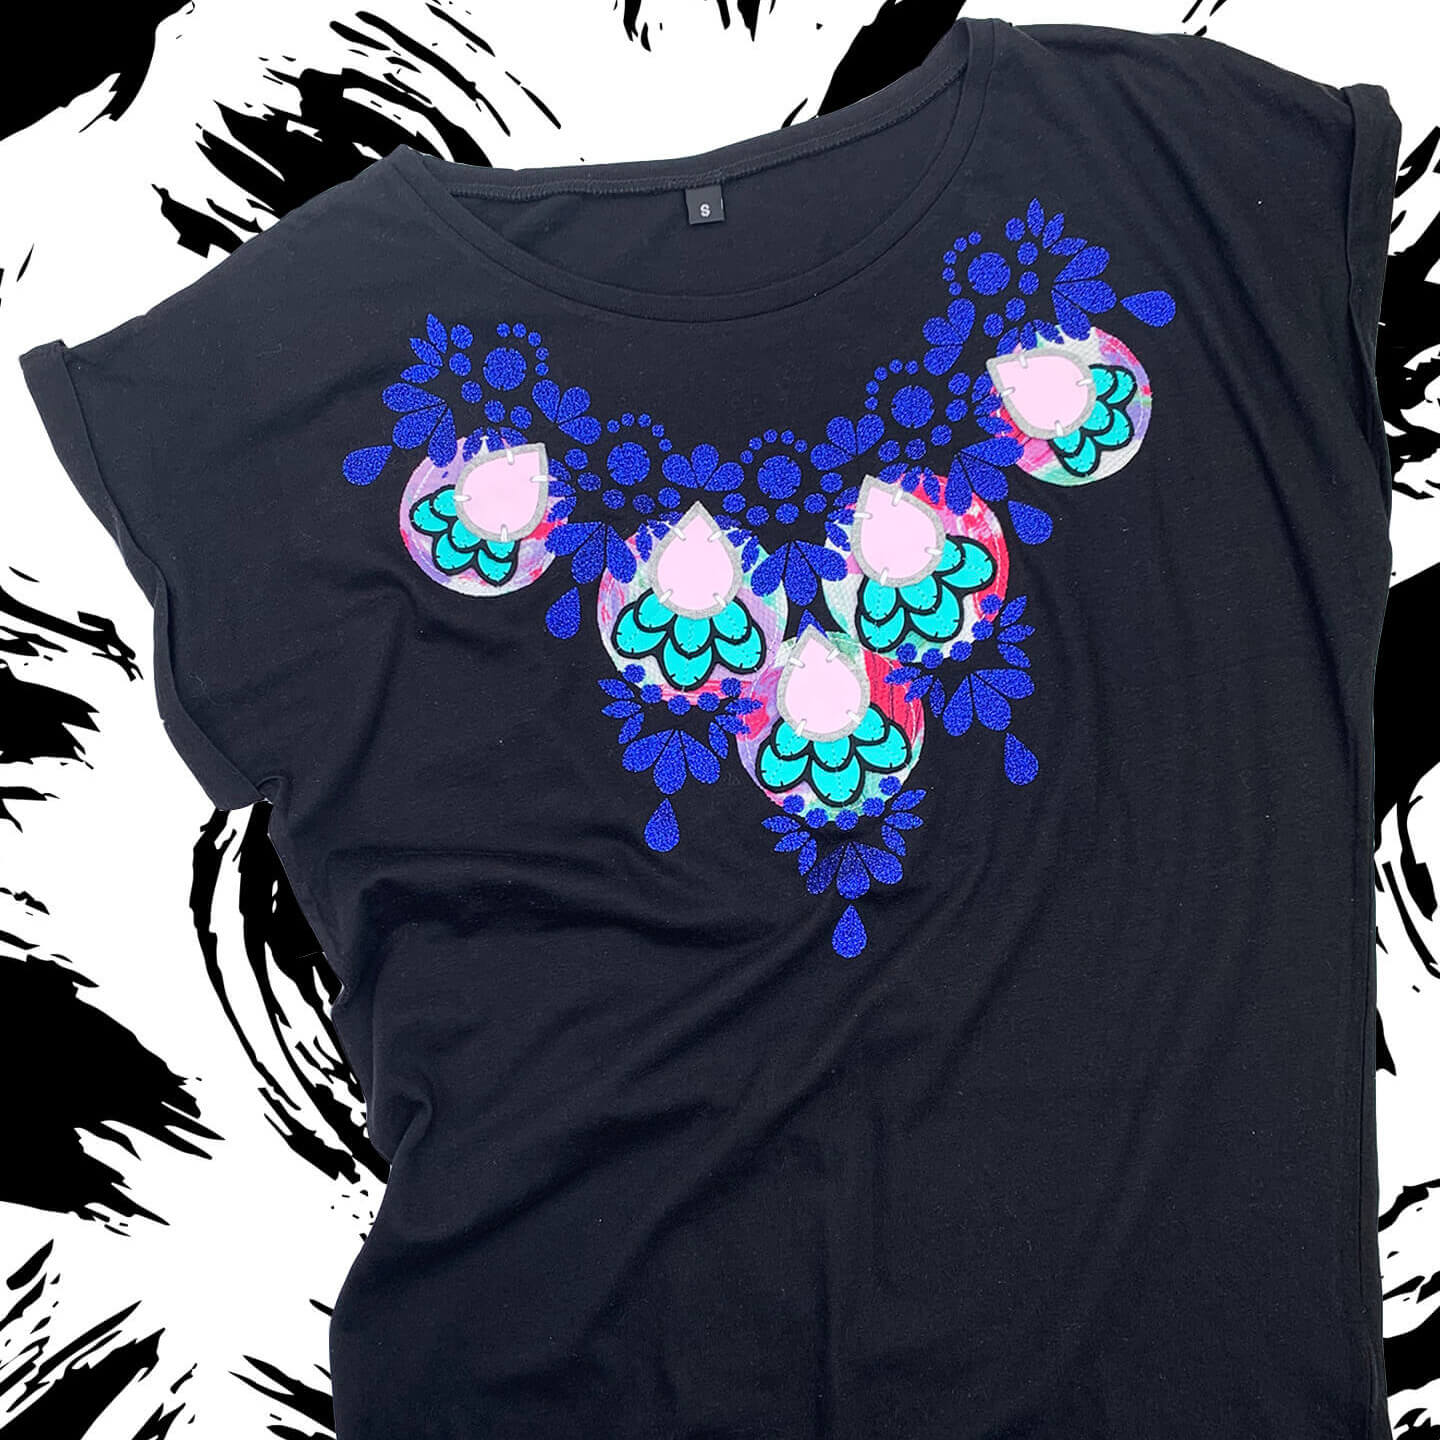 A black slim fit embellished t-shirt in black with a glittery blue, turquoise and lavender print.